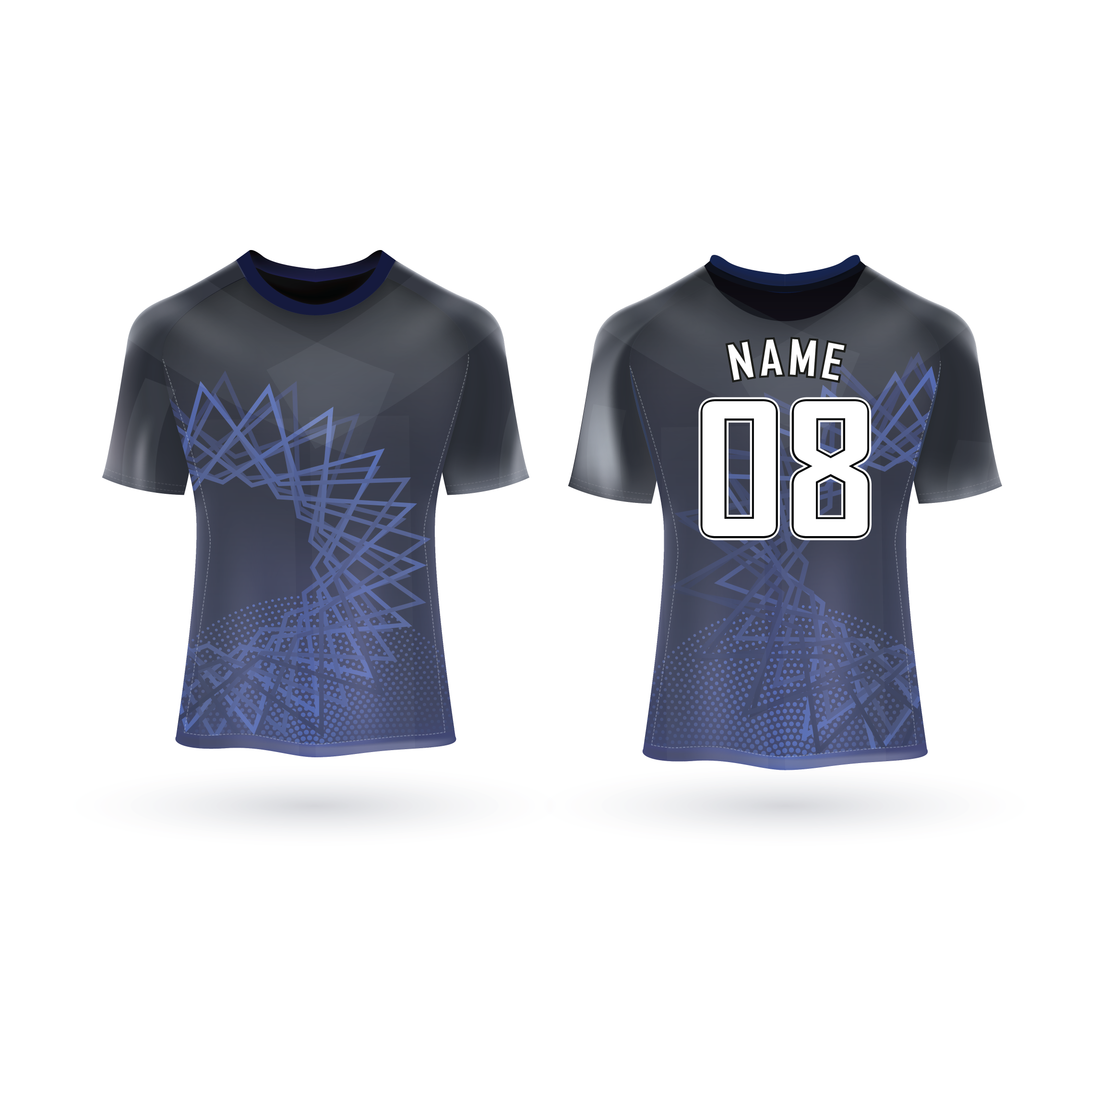 NEXT PRINT All Over Printed Customized Sublimation T-Shirt Unisex Sports Jersey Player Name & Number, Team Name NP50000276